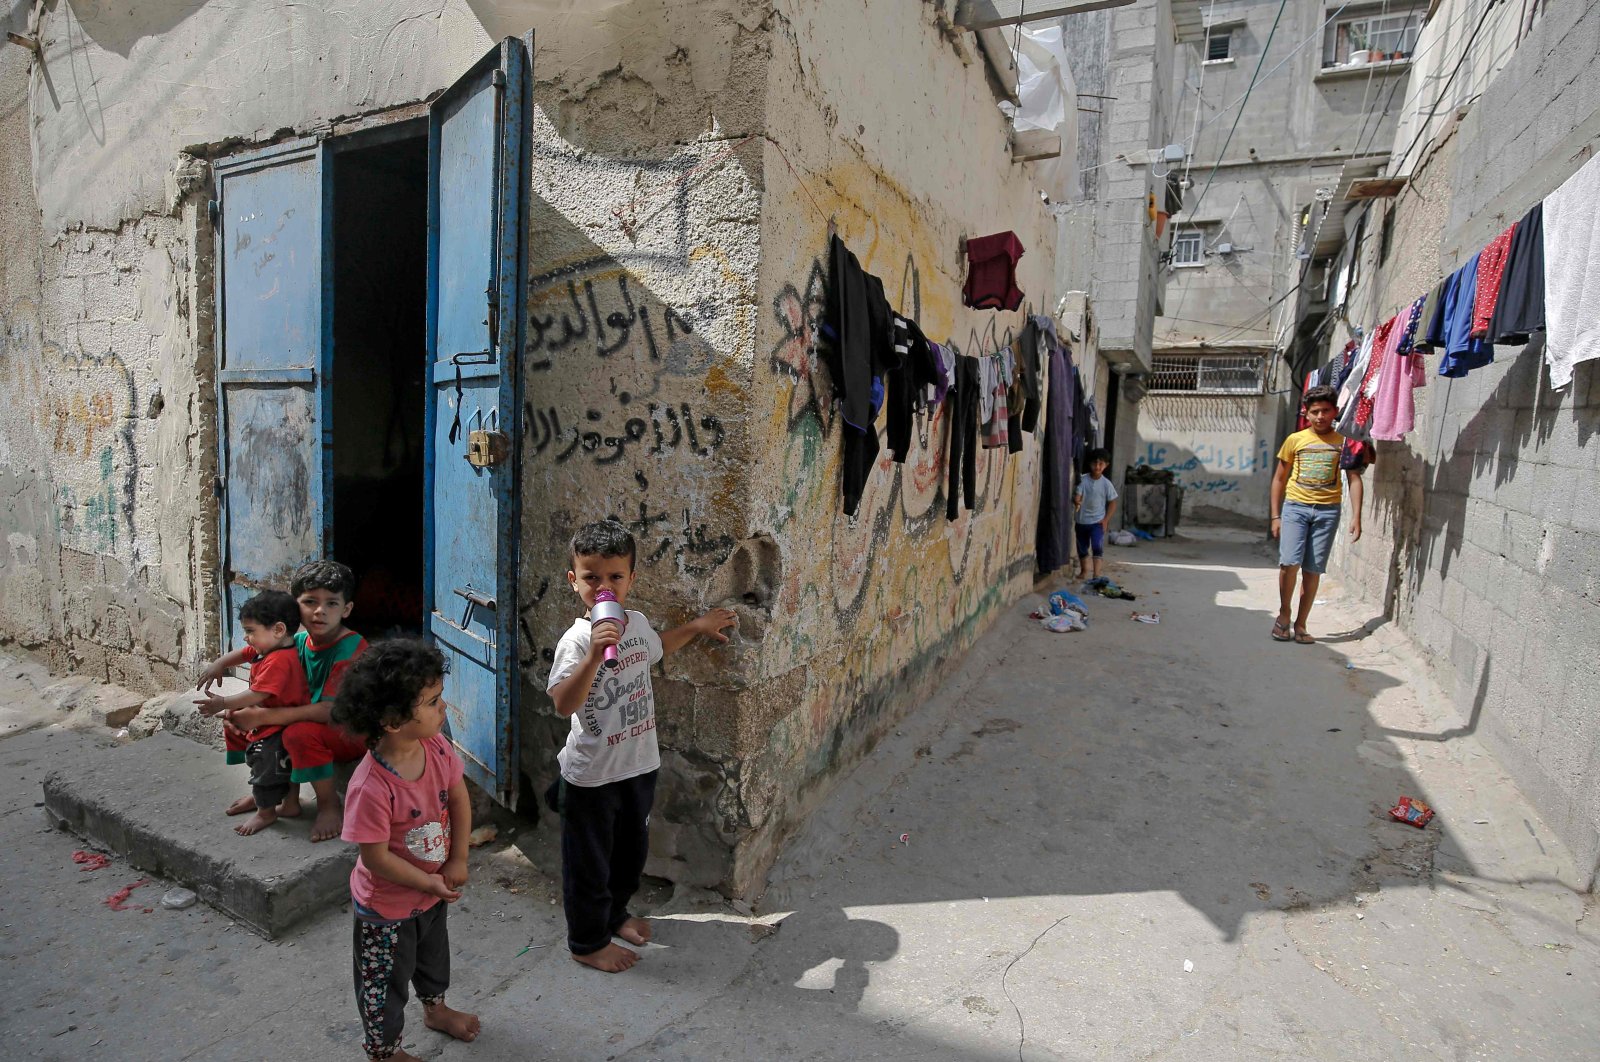 Palestinian children outside their shacks in Gaza City's al-Shati refugee camp, May 15, 2020. (AFP Photo)